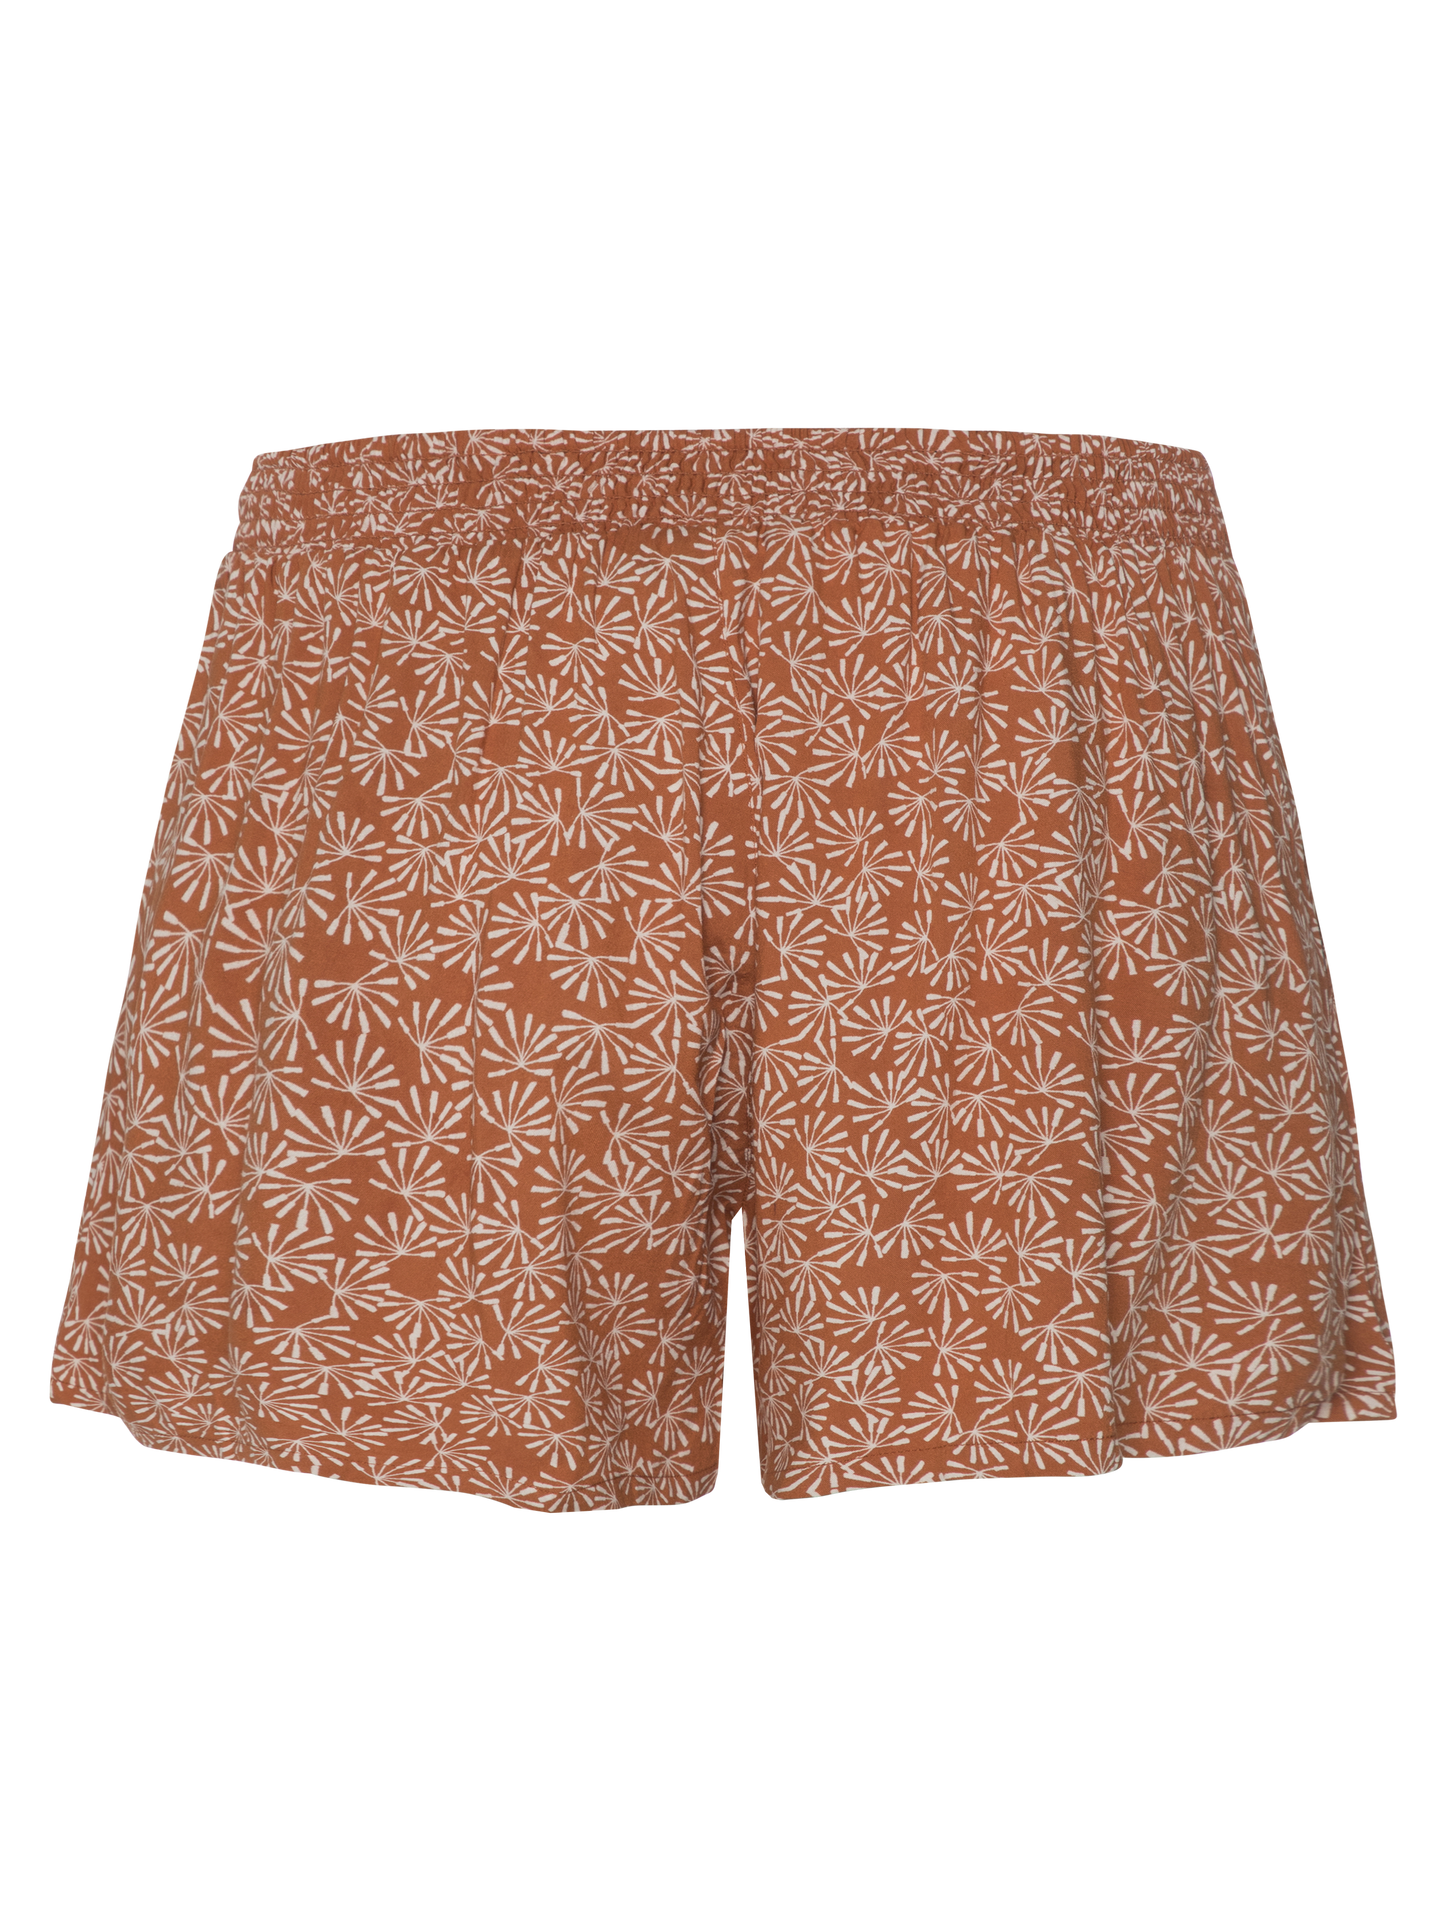 Protest Changwat Shorts in Brown